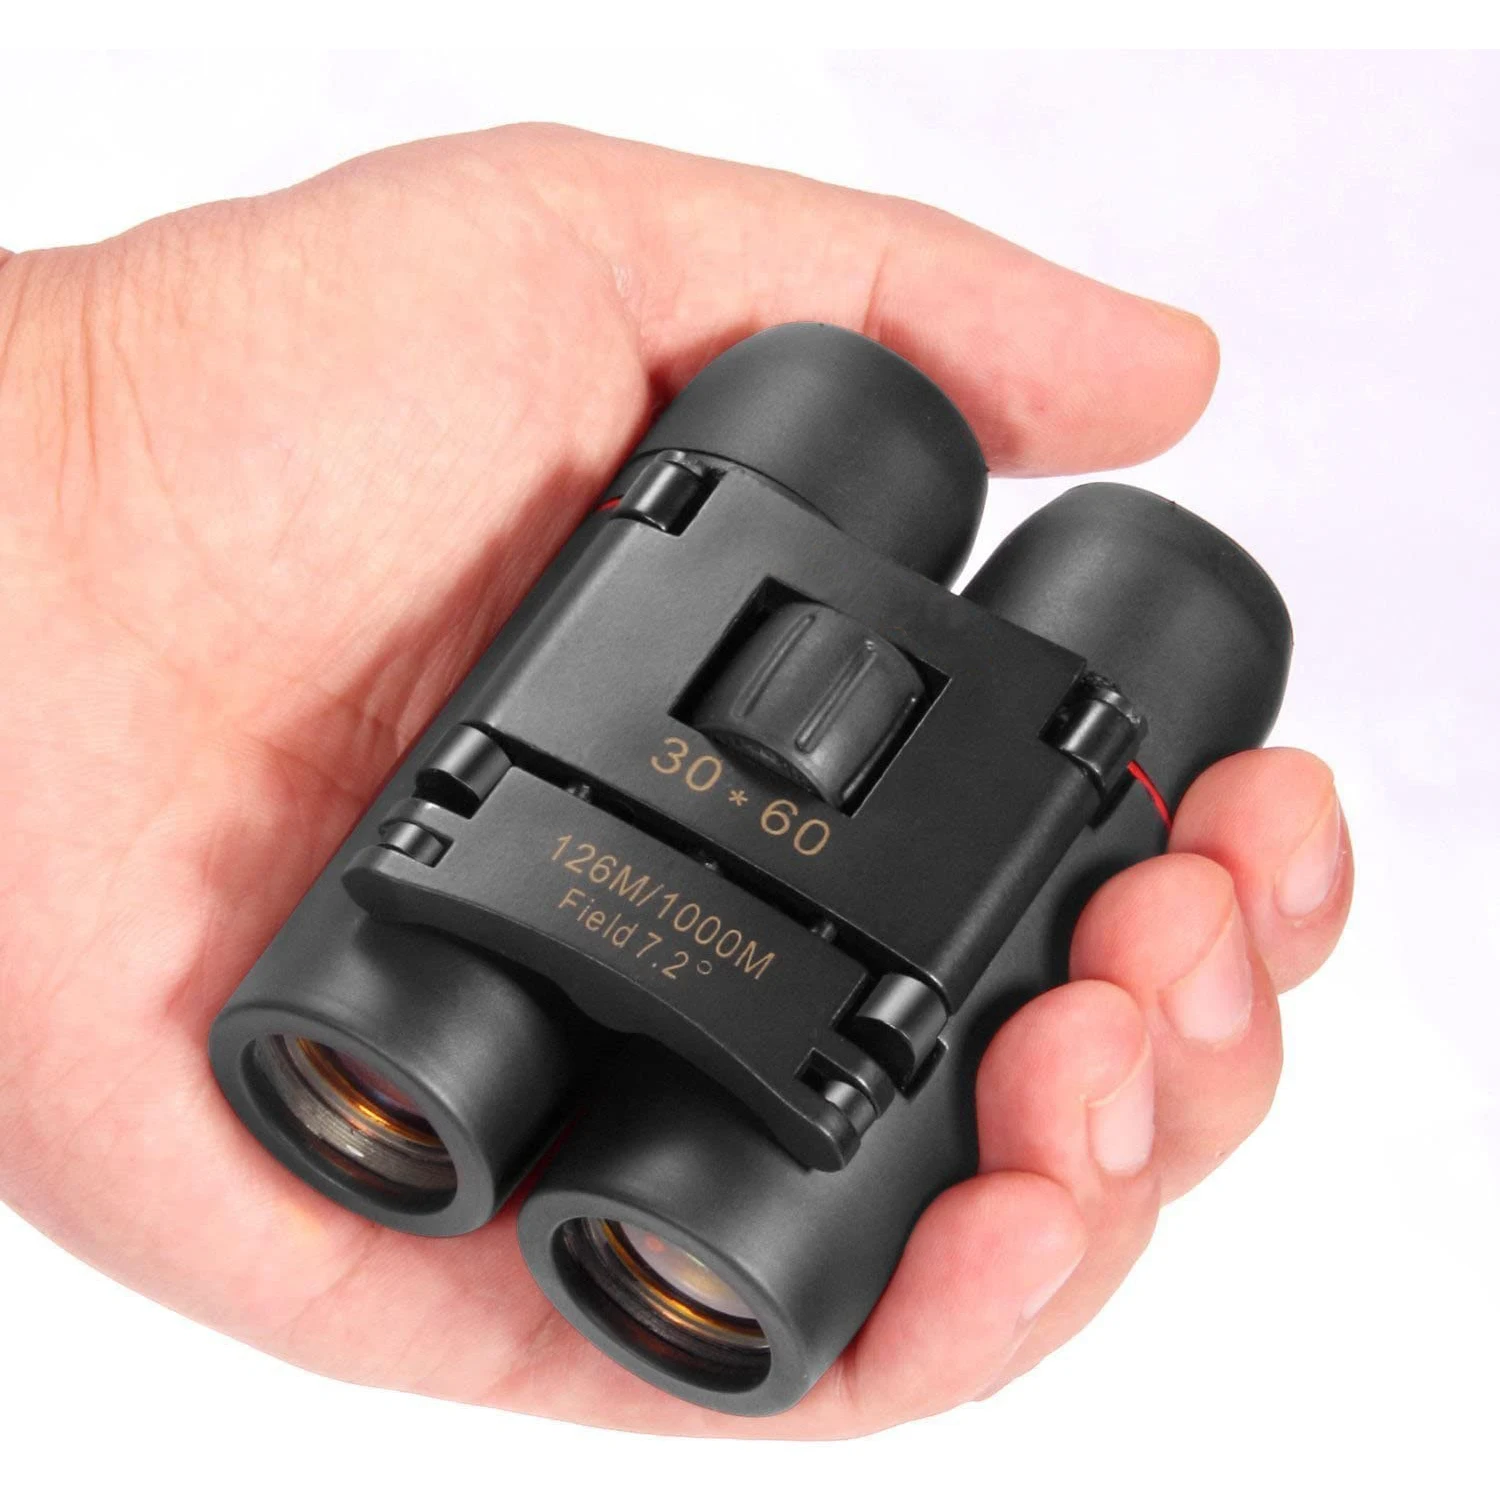 

30x60 Compact Folding Binoculars Telescope For Adults Kids Bird Watching with Low Light Night Vision for Outdoor Birding